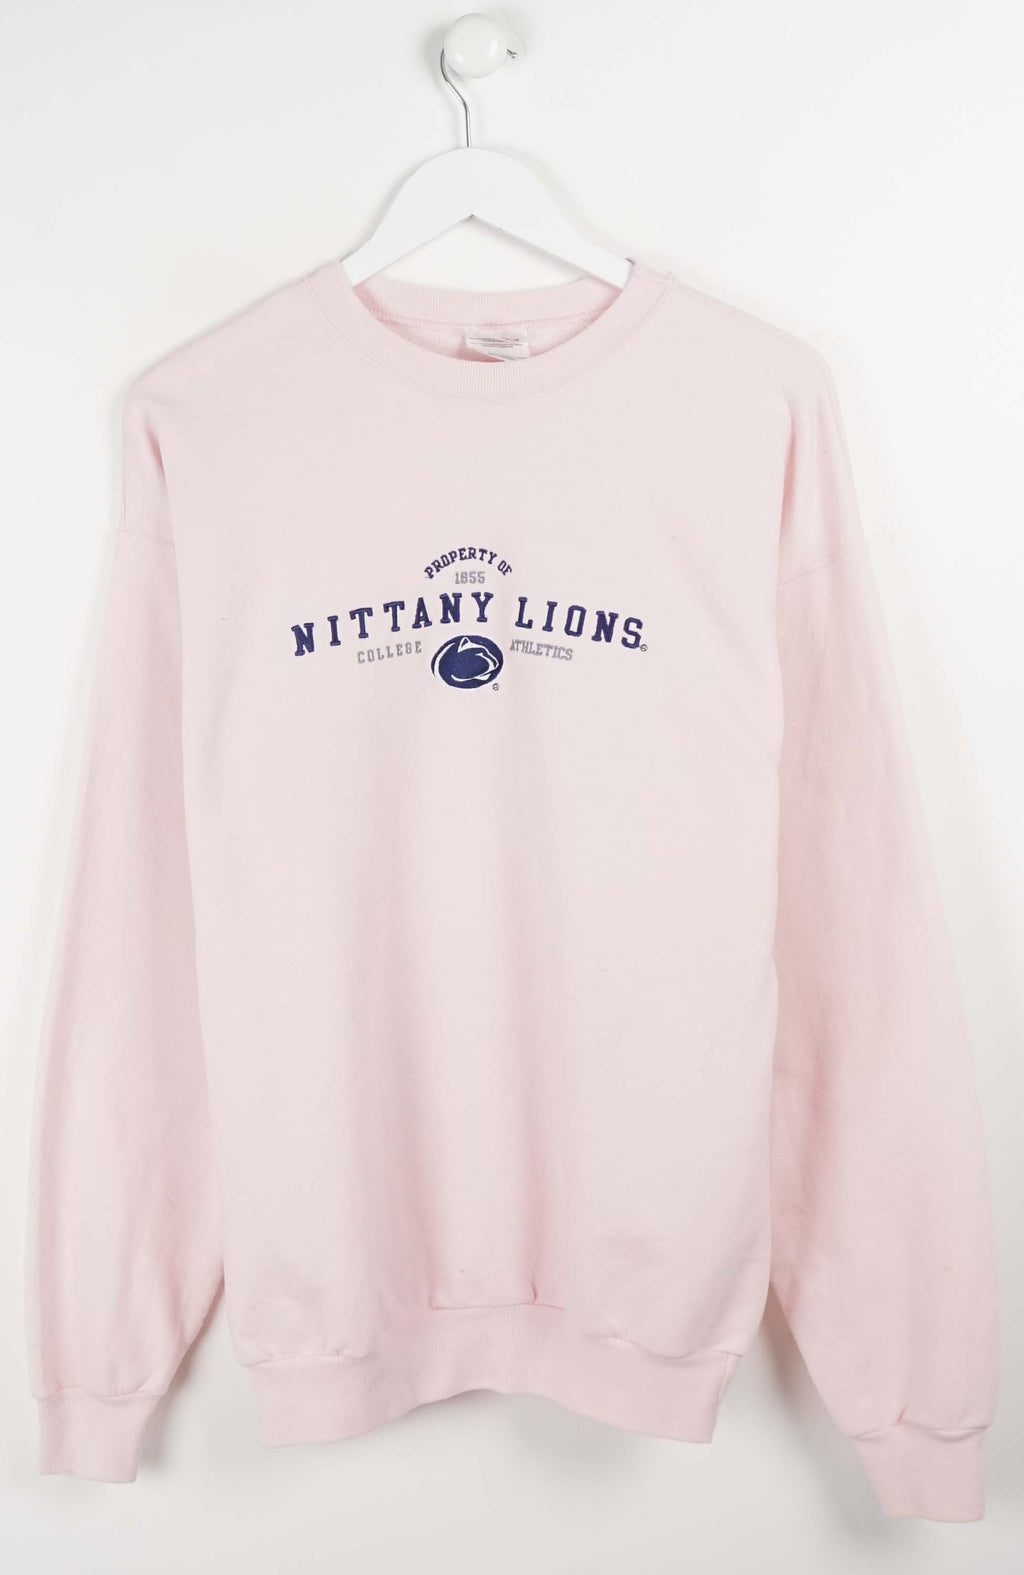 VINTAGE NITTY LIONS COLLEGE SWEATER (L)